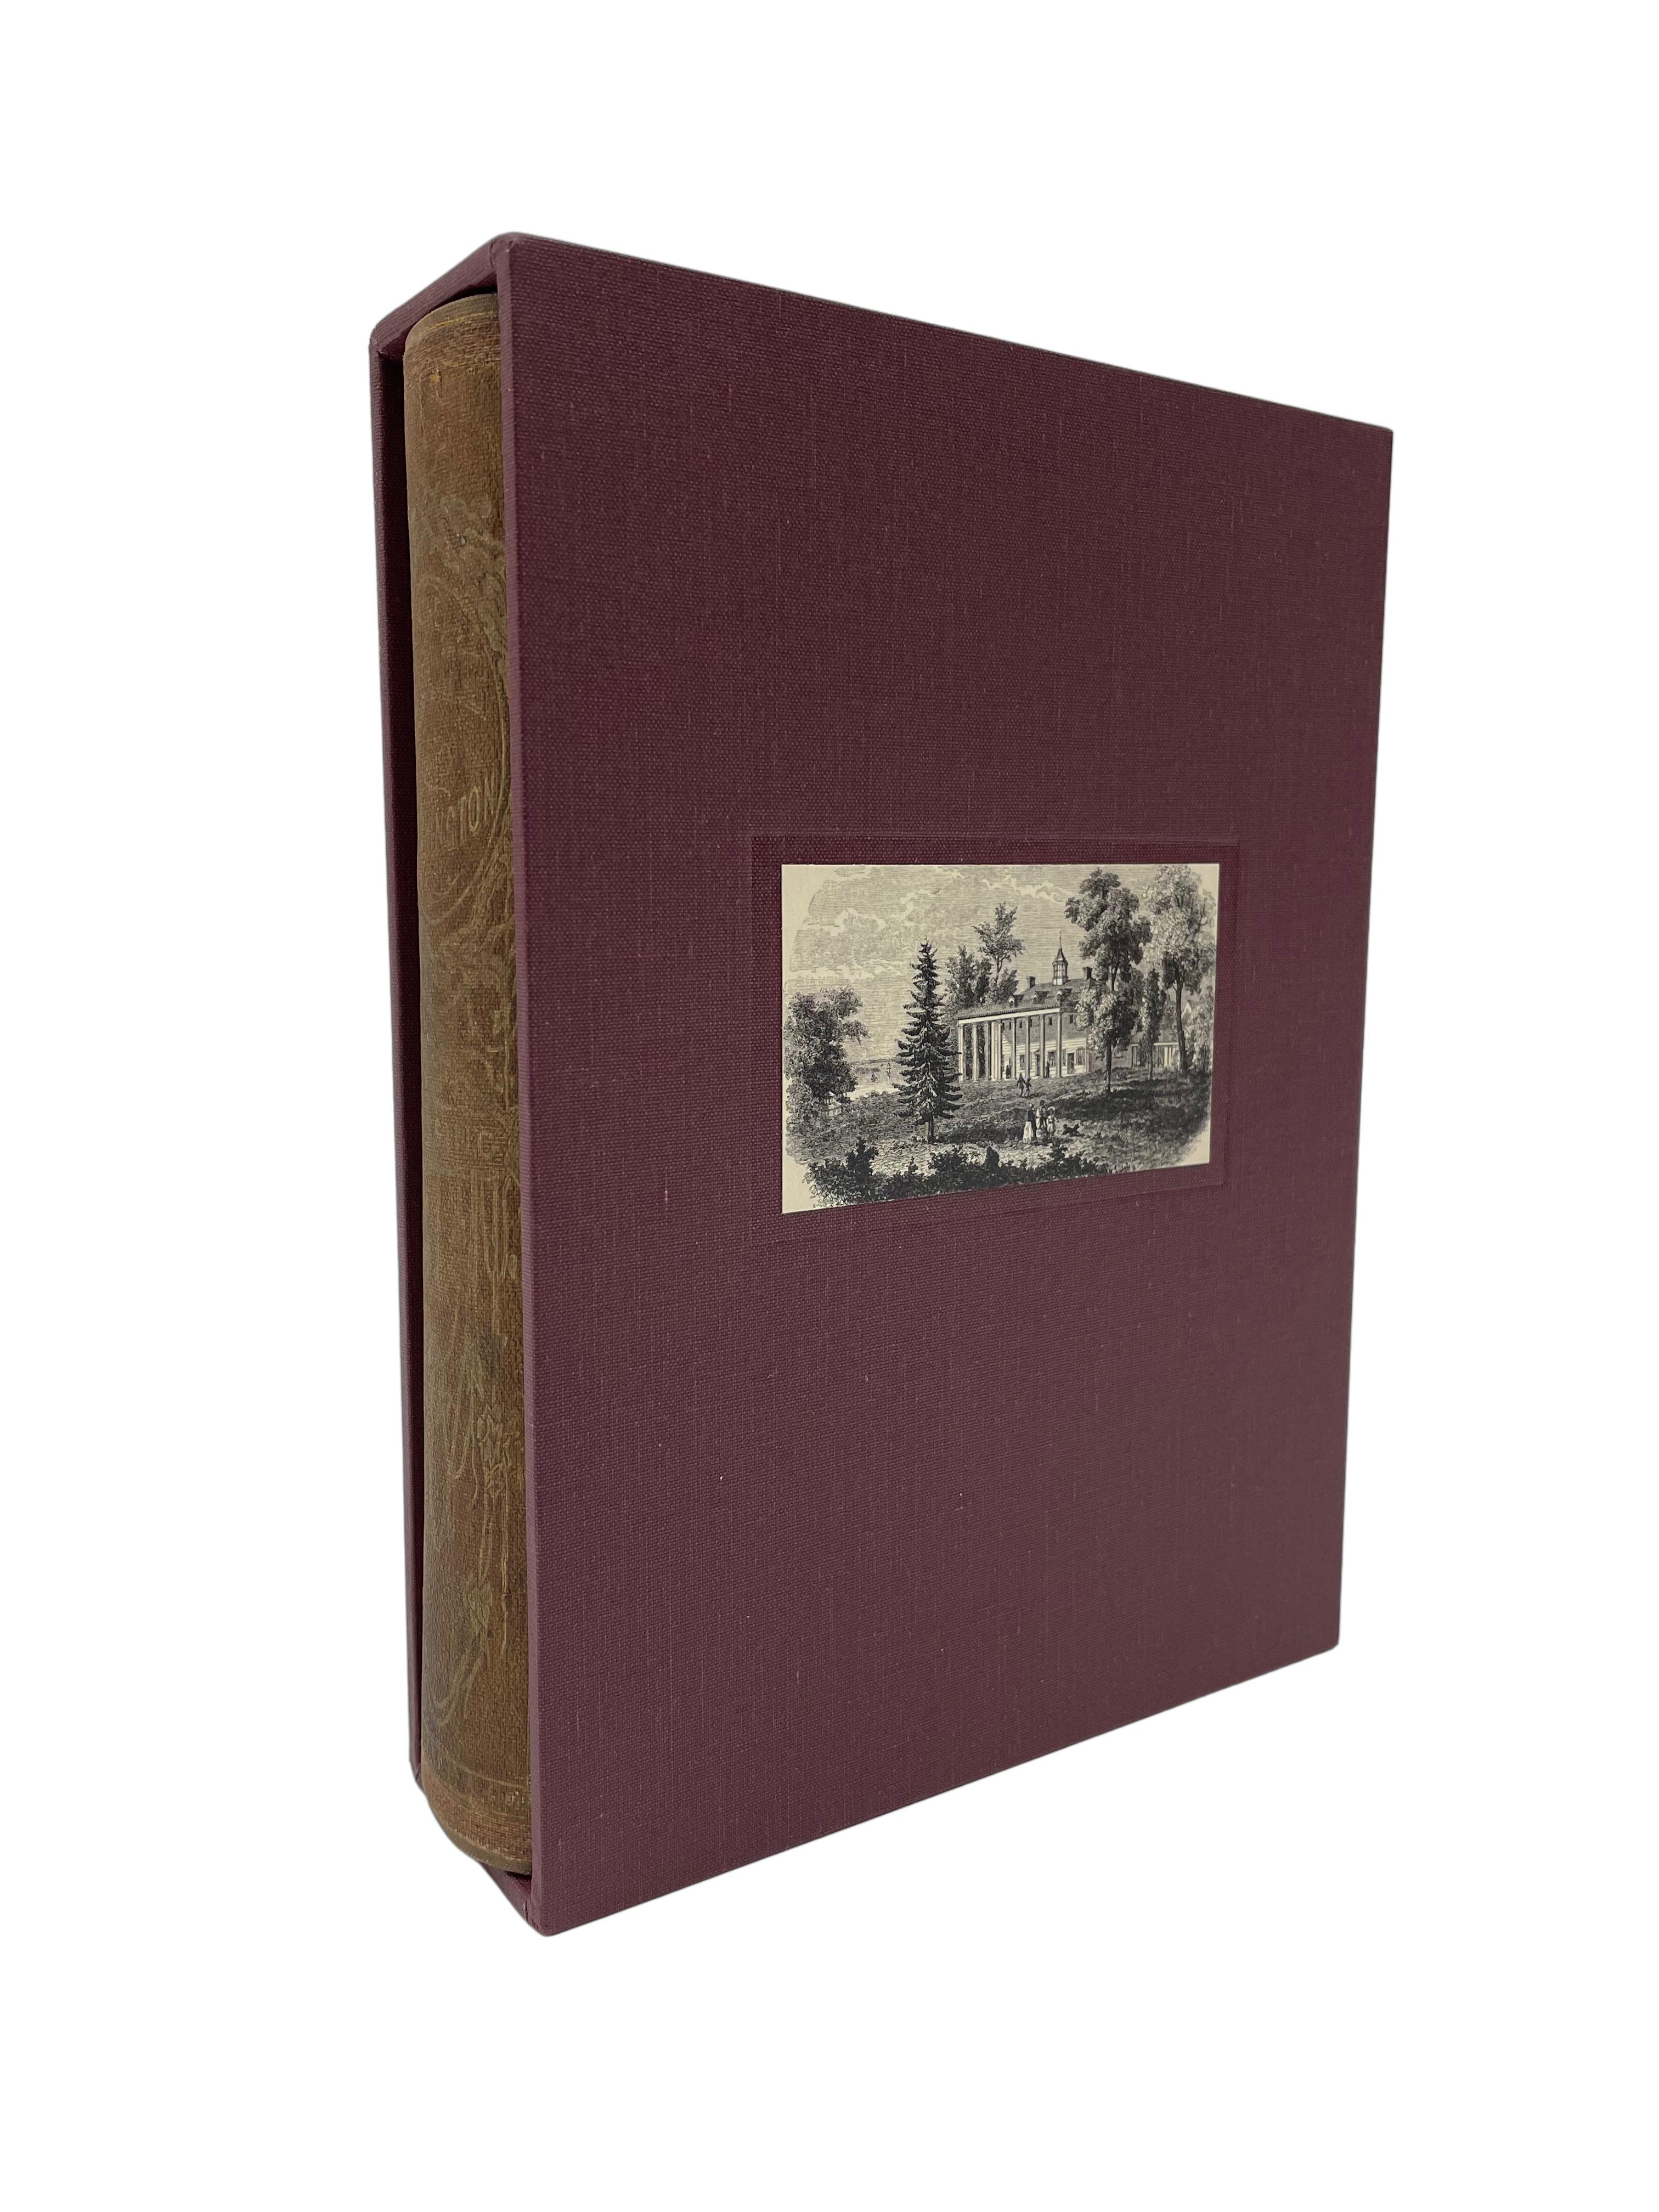 Lossing, Benson. The Home of Washington; or Mount Vernon and its Associations, Historical, Biographical, and Pictorial. Hartford: A.S. Hale & Co.,1870. Early edition. Octavo, in original brown cloth with blind and gilt embossed boards. 

Presented